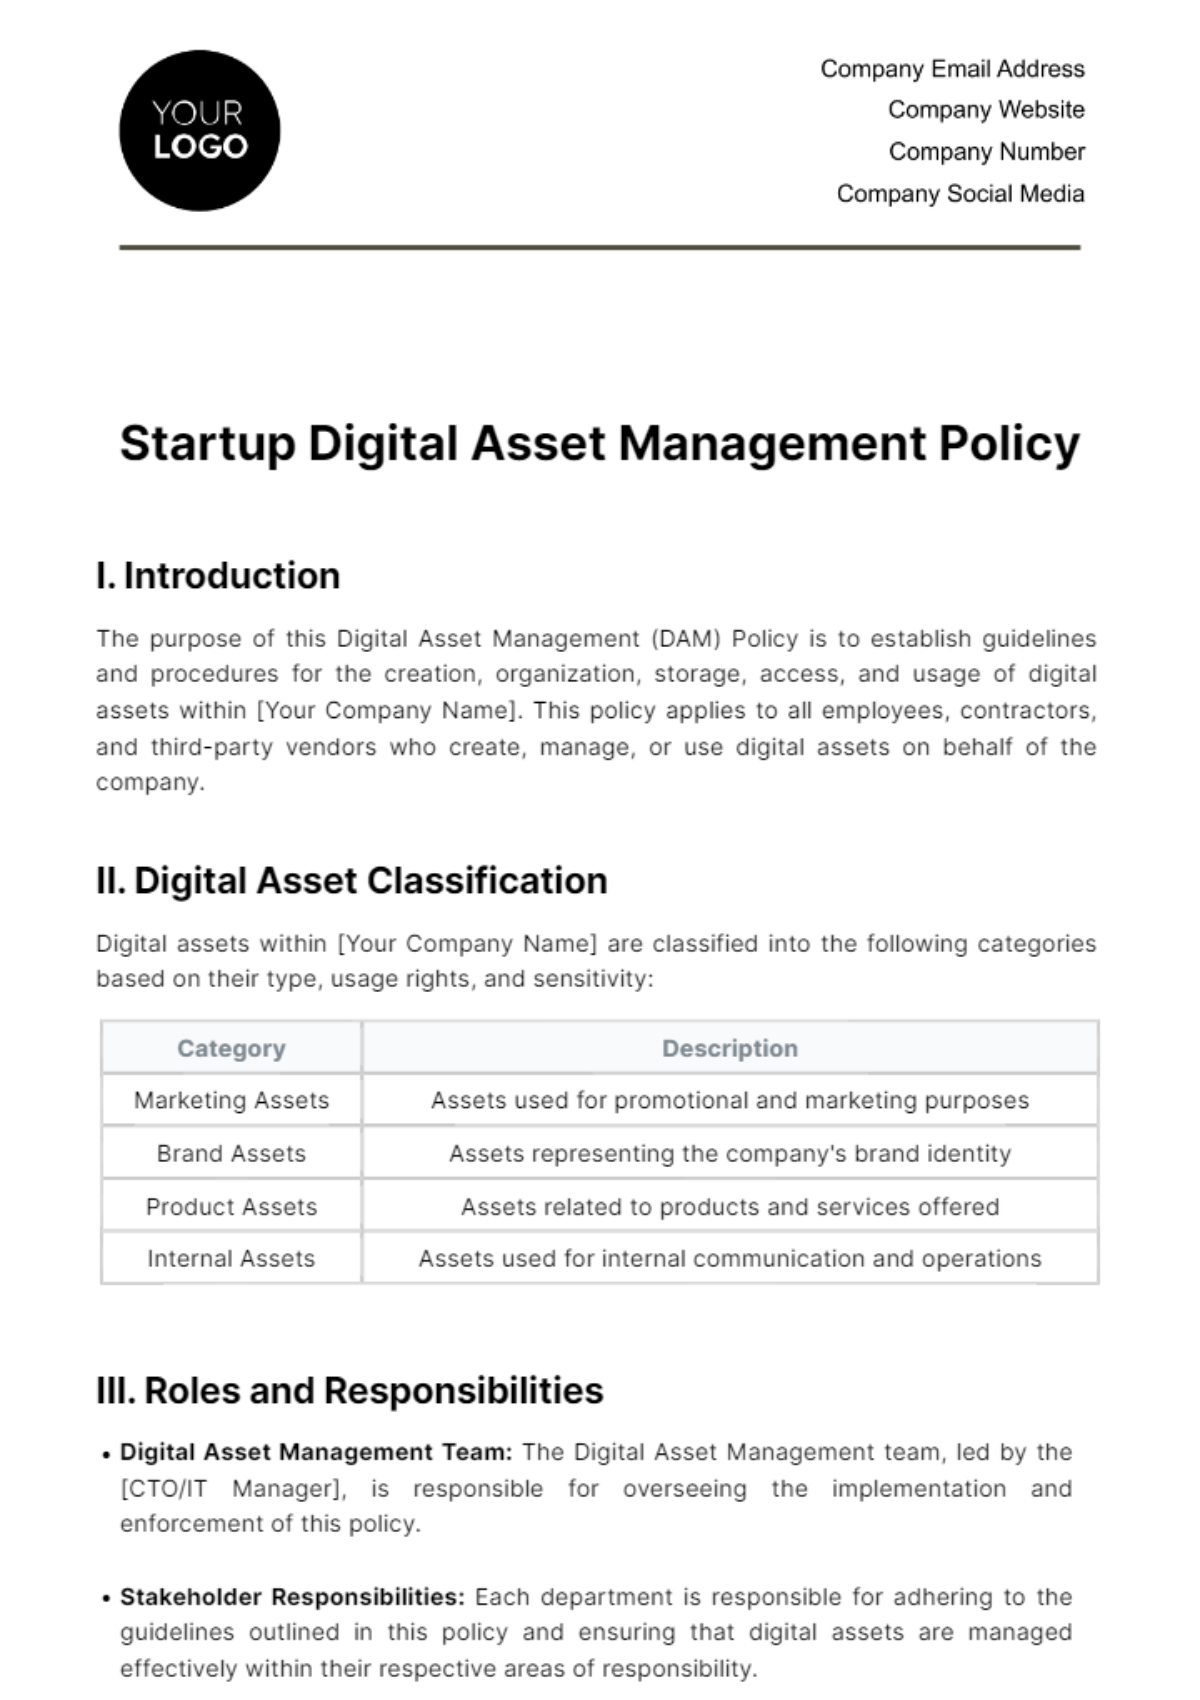 Startup Digital Asset Management Policy Template